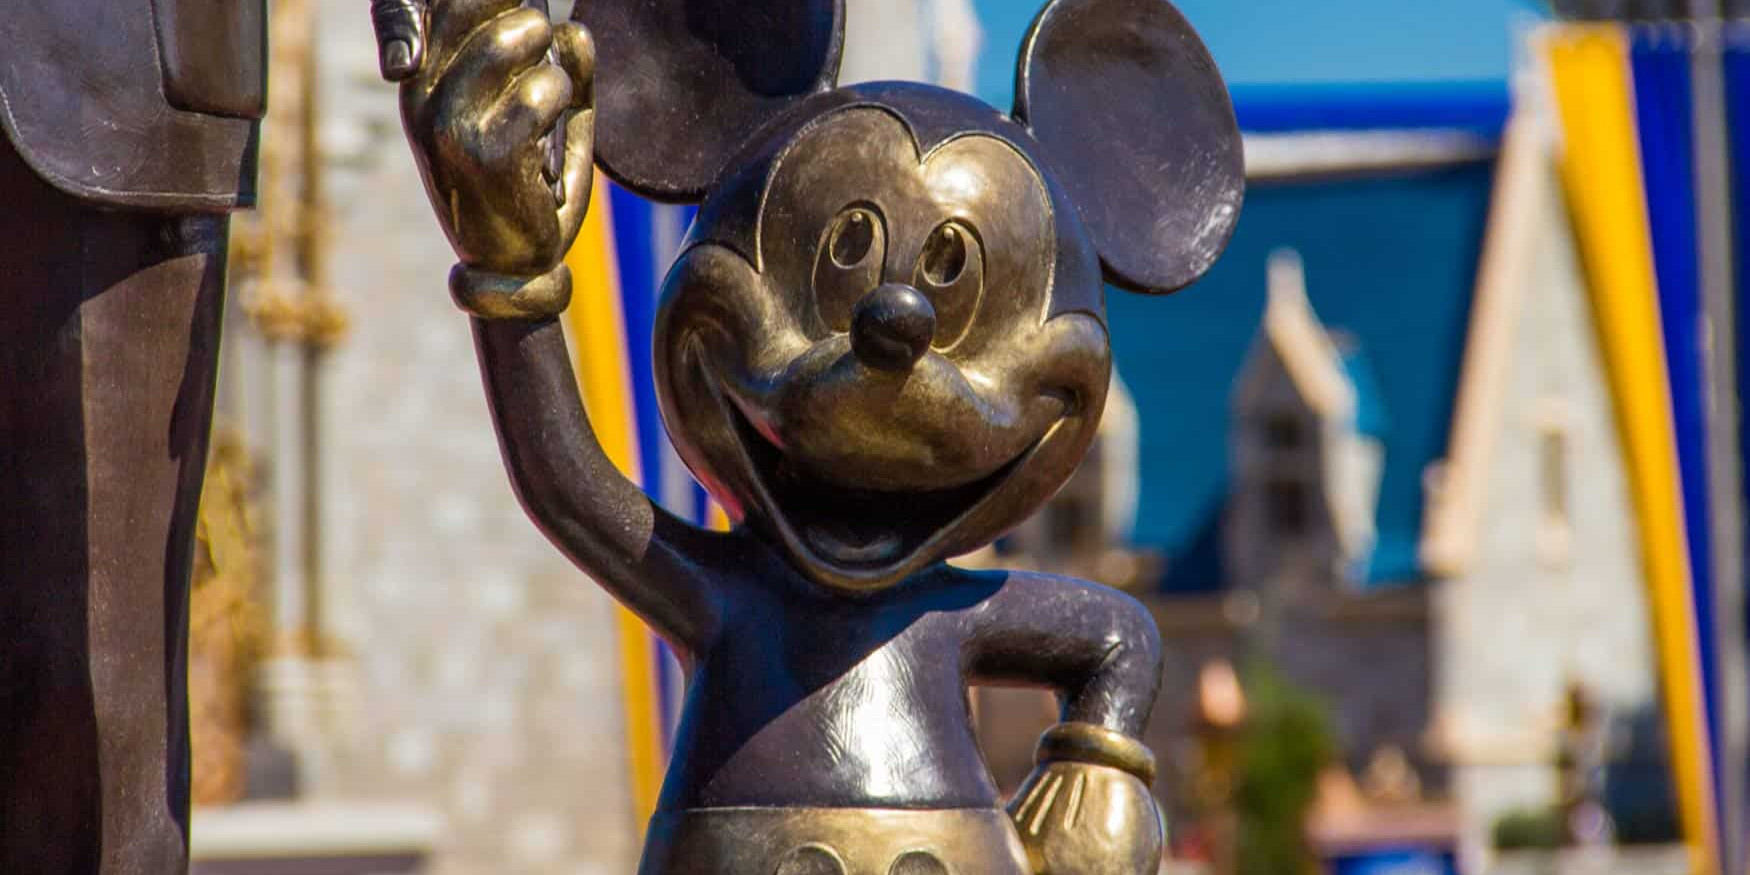 Mickey Mouse Statue - Disney World Planning Guide - The Best Times to Visit Disney World